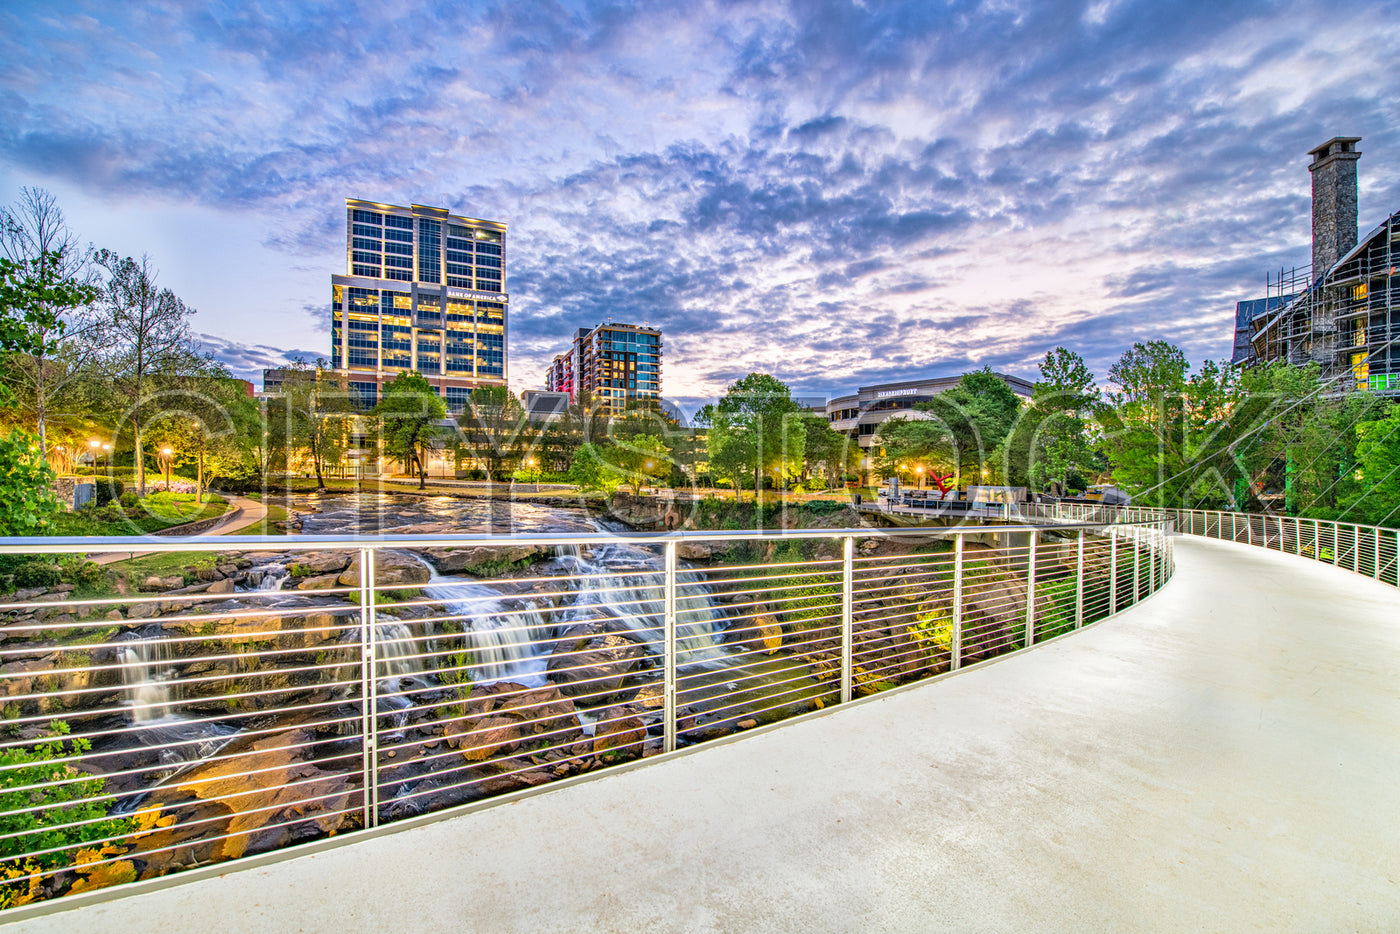 Modern Greenville, SC cityscape at twilight with waterfall and pedestrian bridge